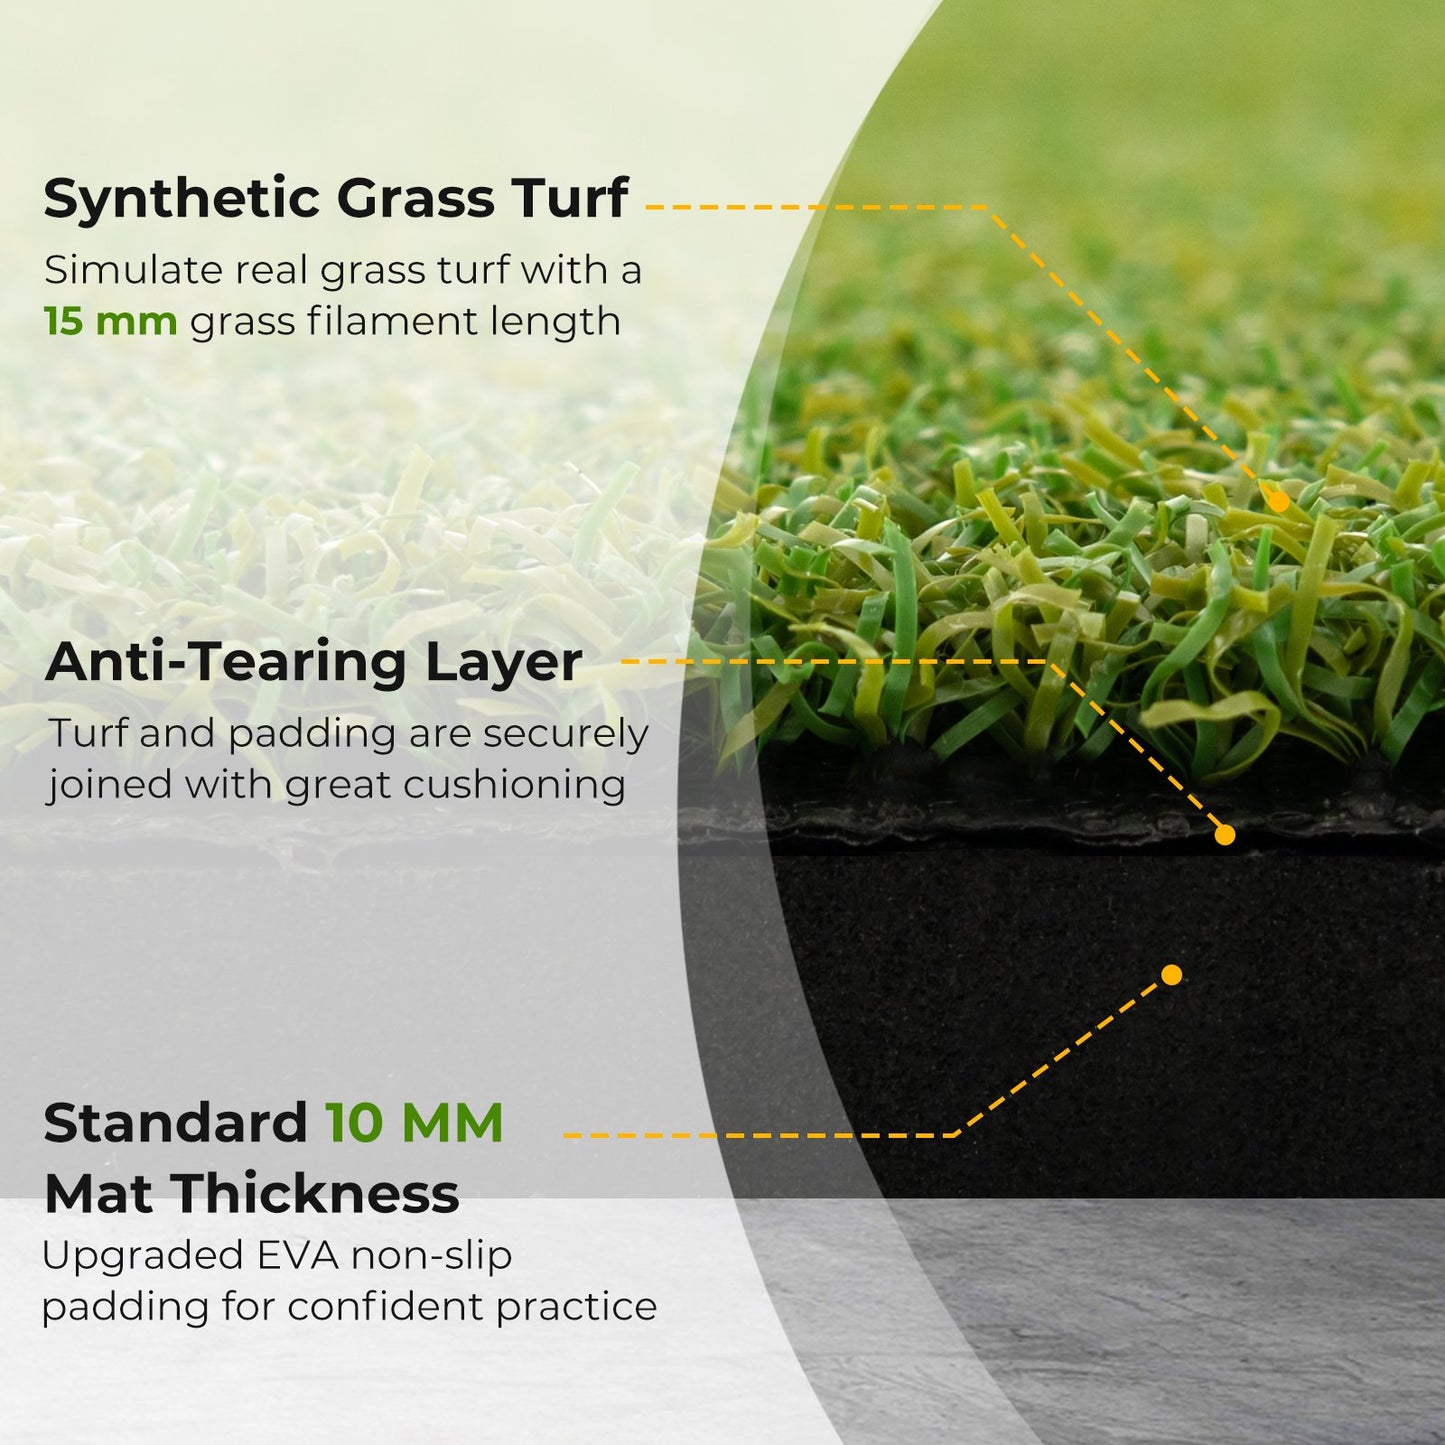 Artificial Turf Mat for Indoor and Outdoor Golf Practice Includes 2 Rubber Tees and 2 Alignment Sticks-20mm, Green